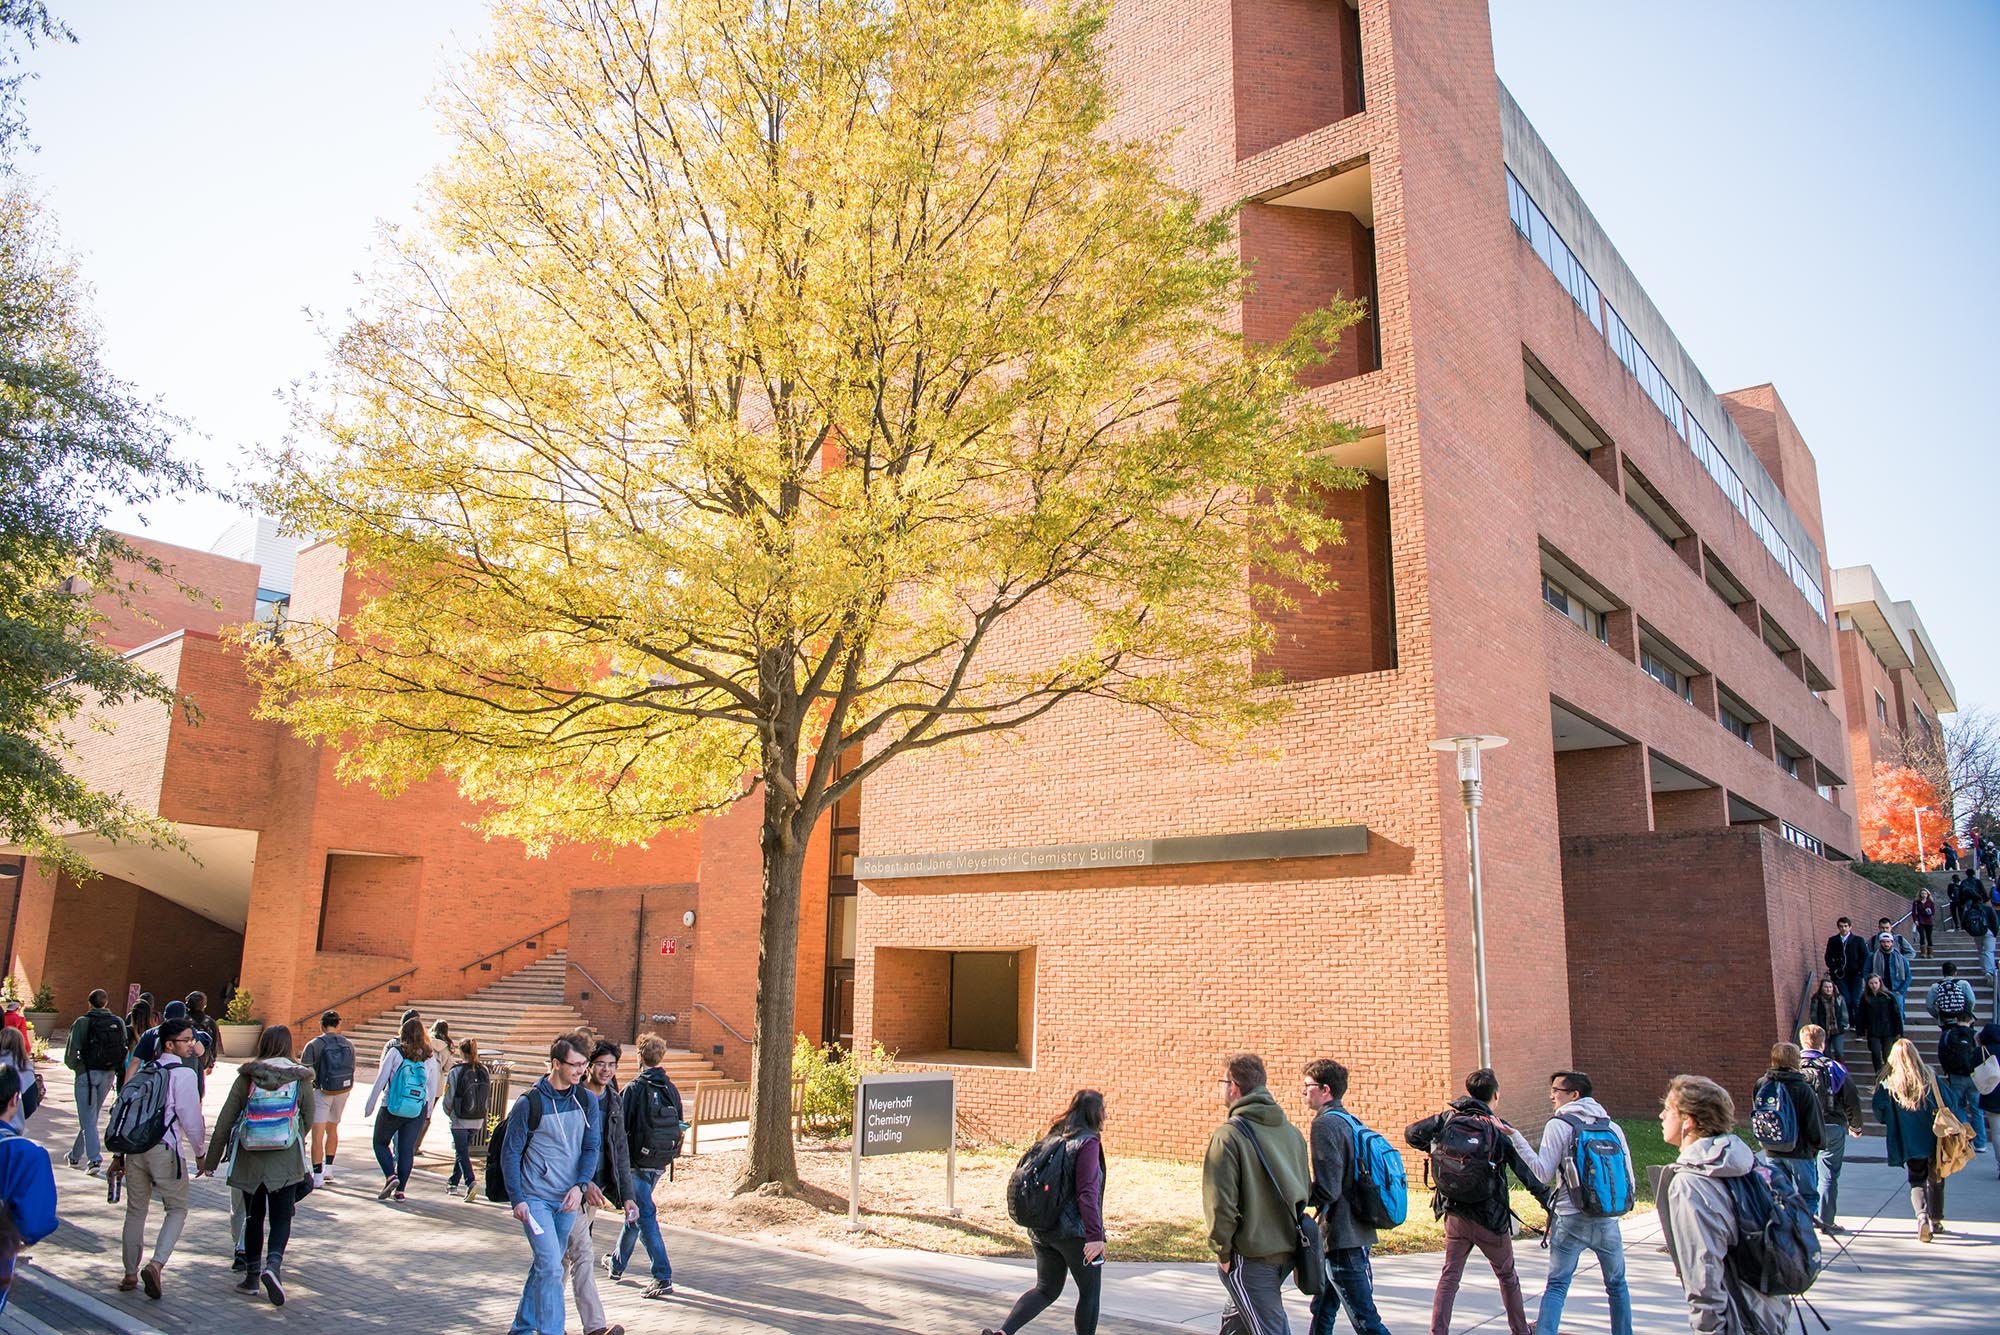 When classes are in session, UMBC's academic row is bustling with students. Pictured here is a crowd of busy students walking around the Meyerhoff Chemistry Building.